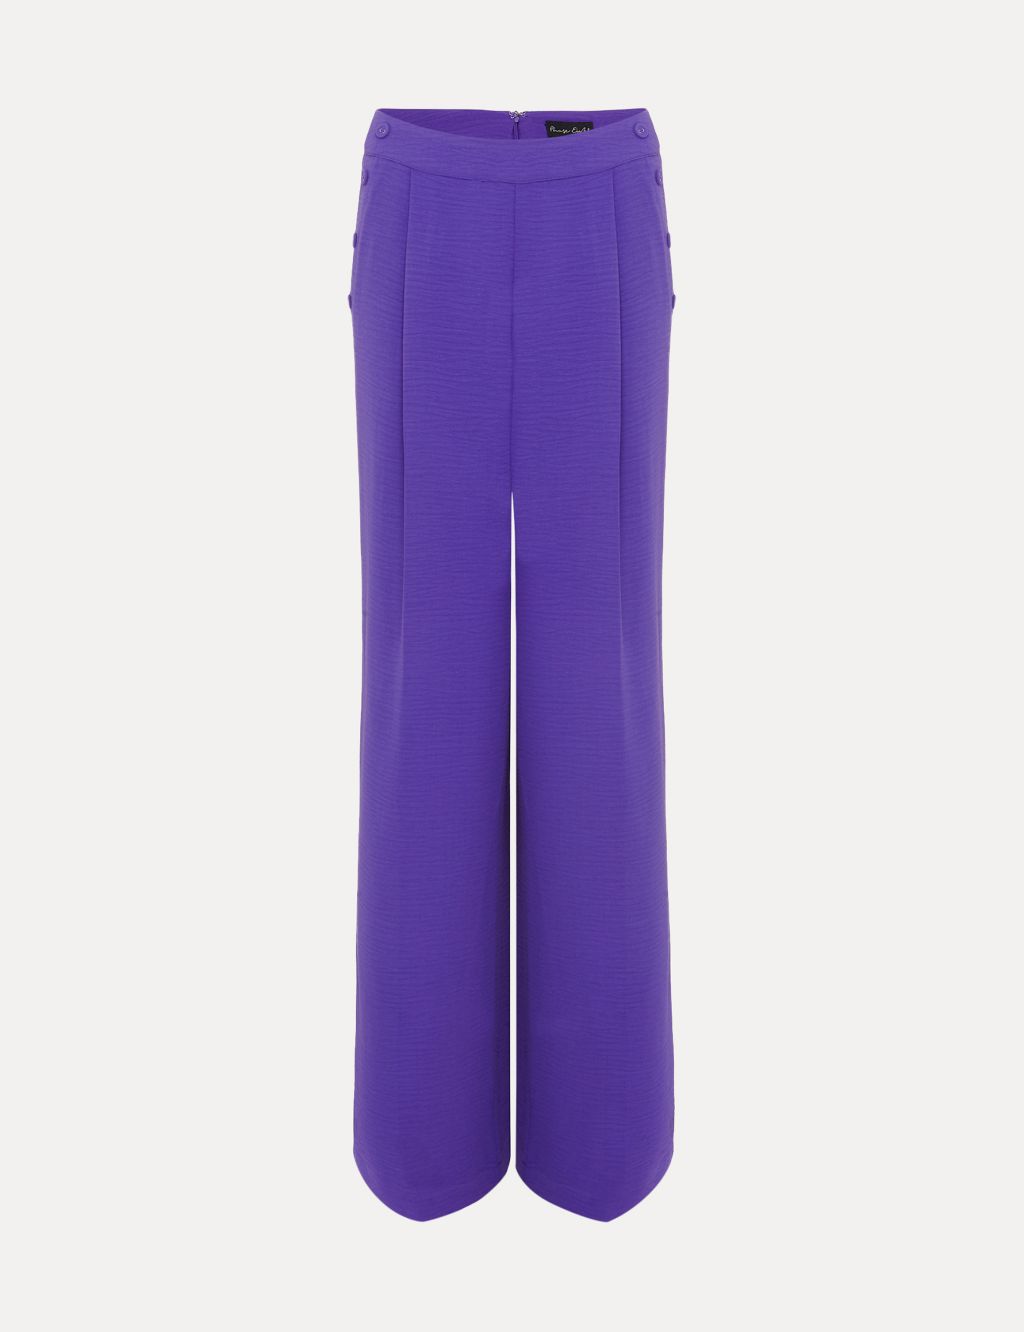 Textured Button Detail Wide Leg Trousers image 2